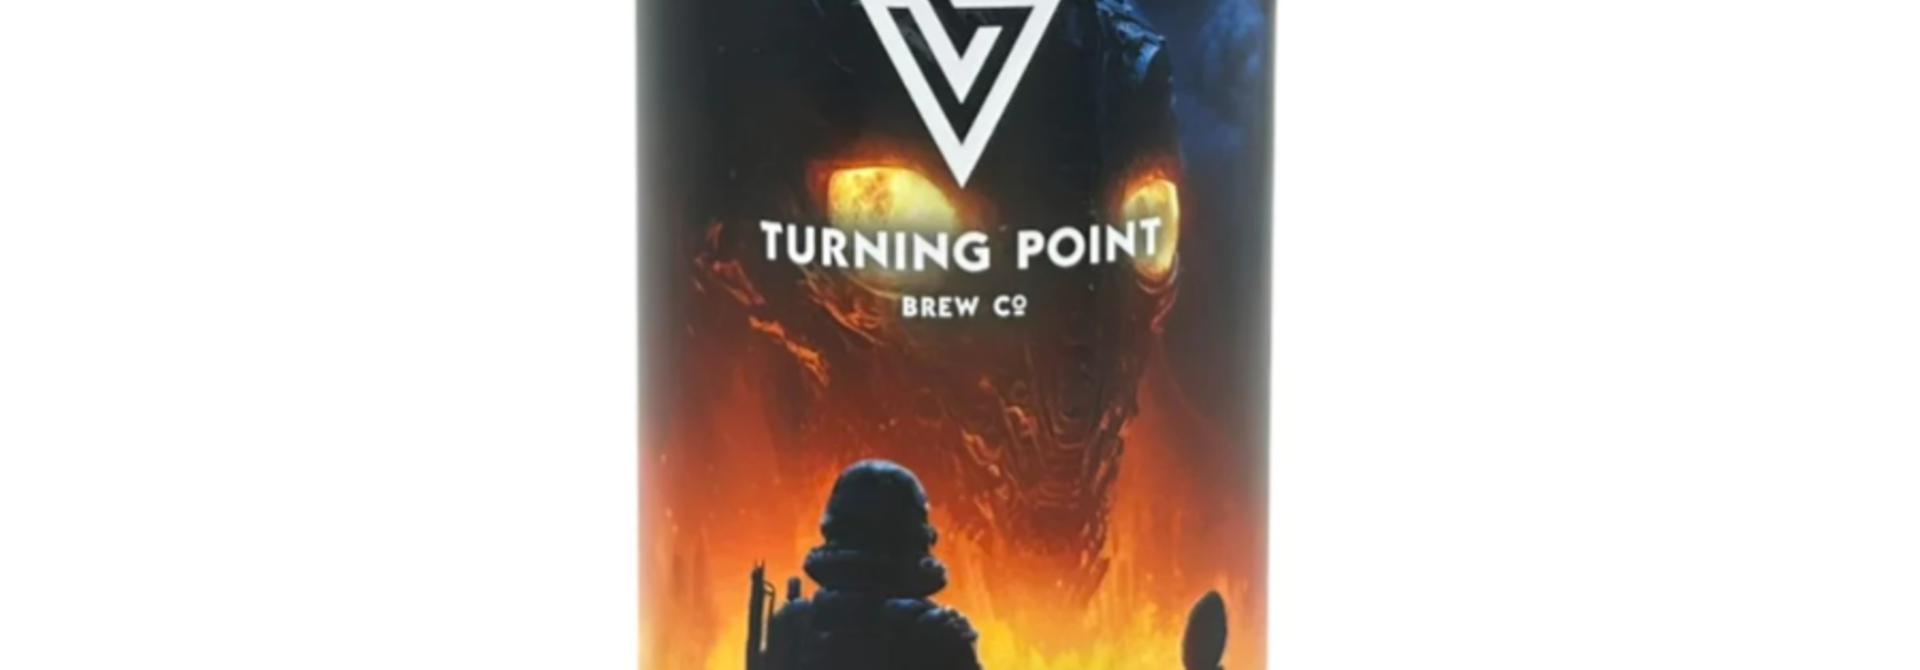 Azvex brewing & Turning Point Development Hell 4 44cl 6,7%